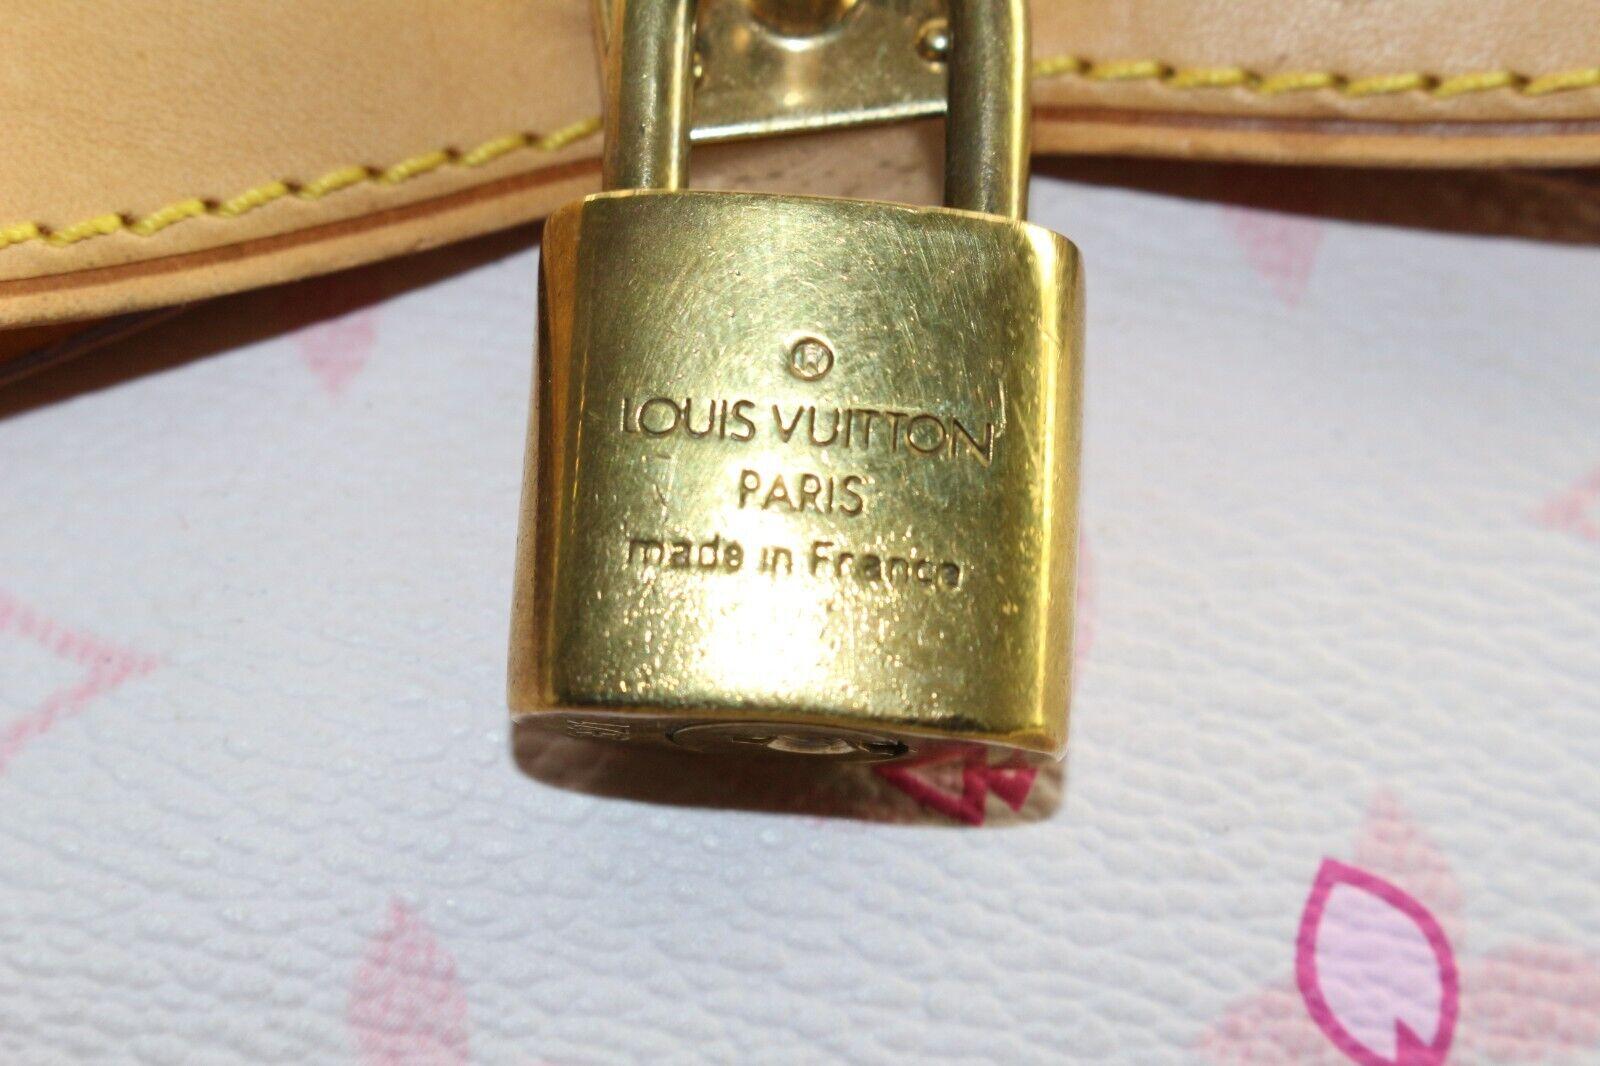 
Date Code/Serial Number: N/A

Made In: France

Measurements: Length:  11